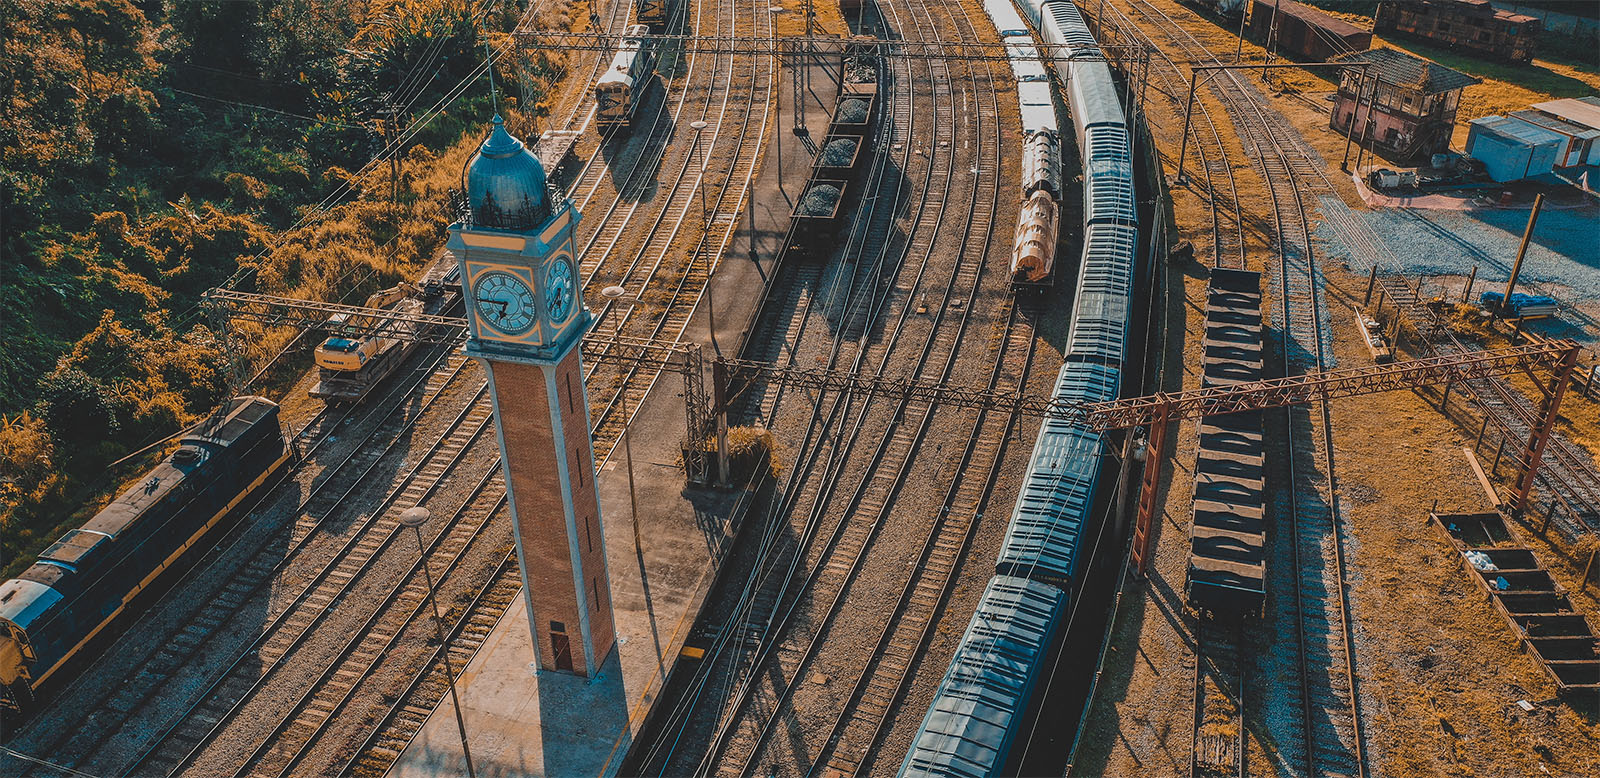 Photo of a rail yard in a tropical location, with train cars and a clock tower.